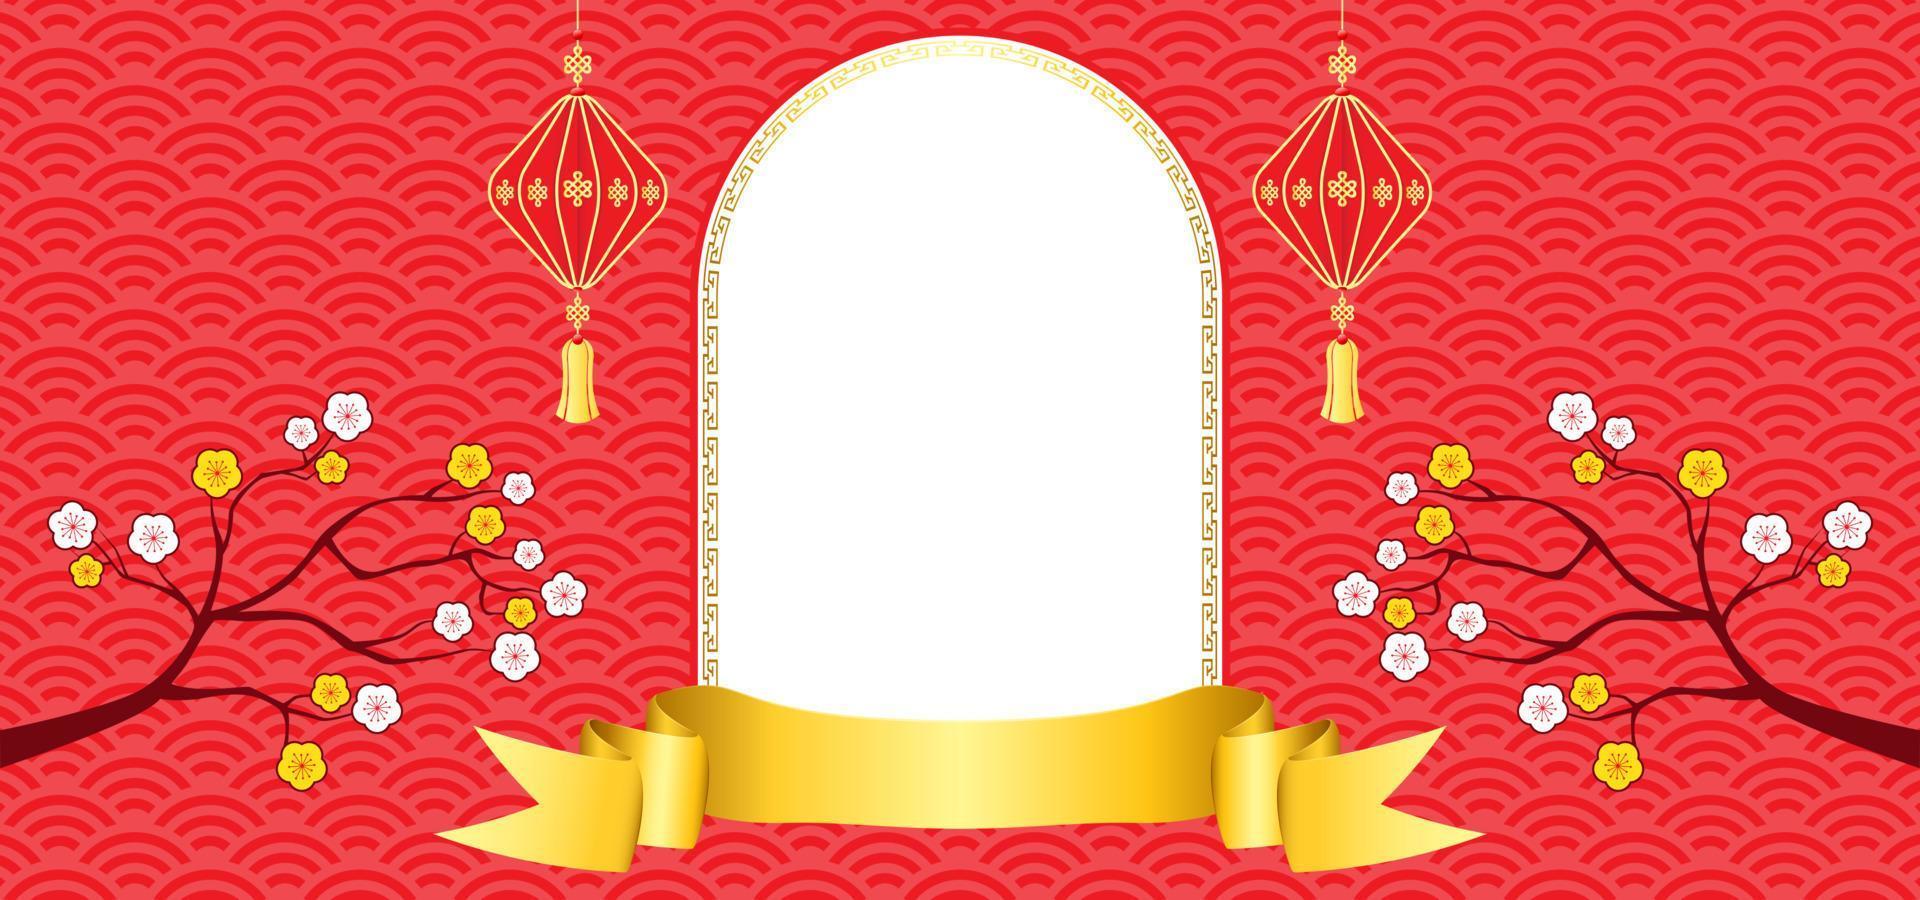 Chinese New Year Background with blank space for text. Red and gold background theme with pattern texture, ribbon, flower and lantern. Vector illustration